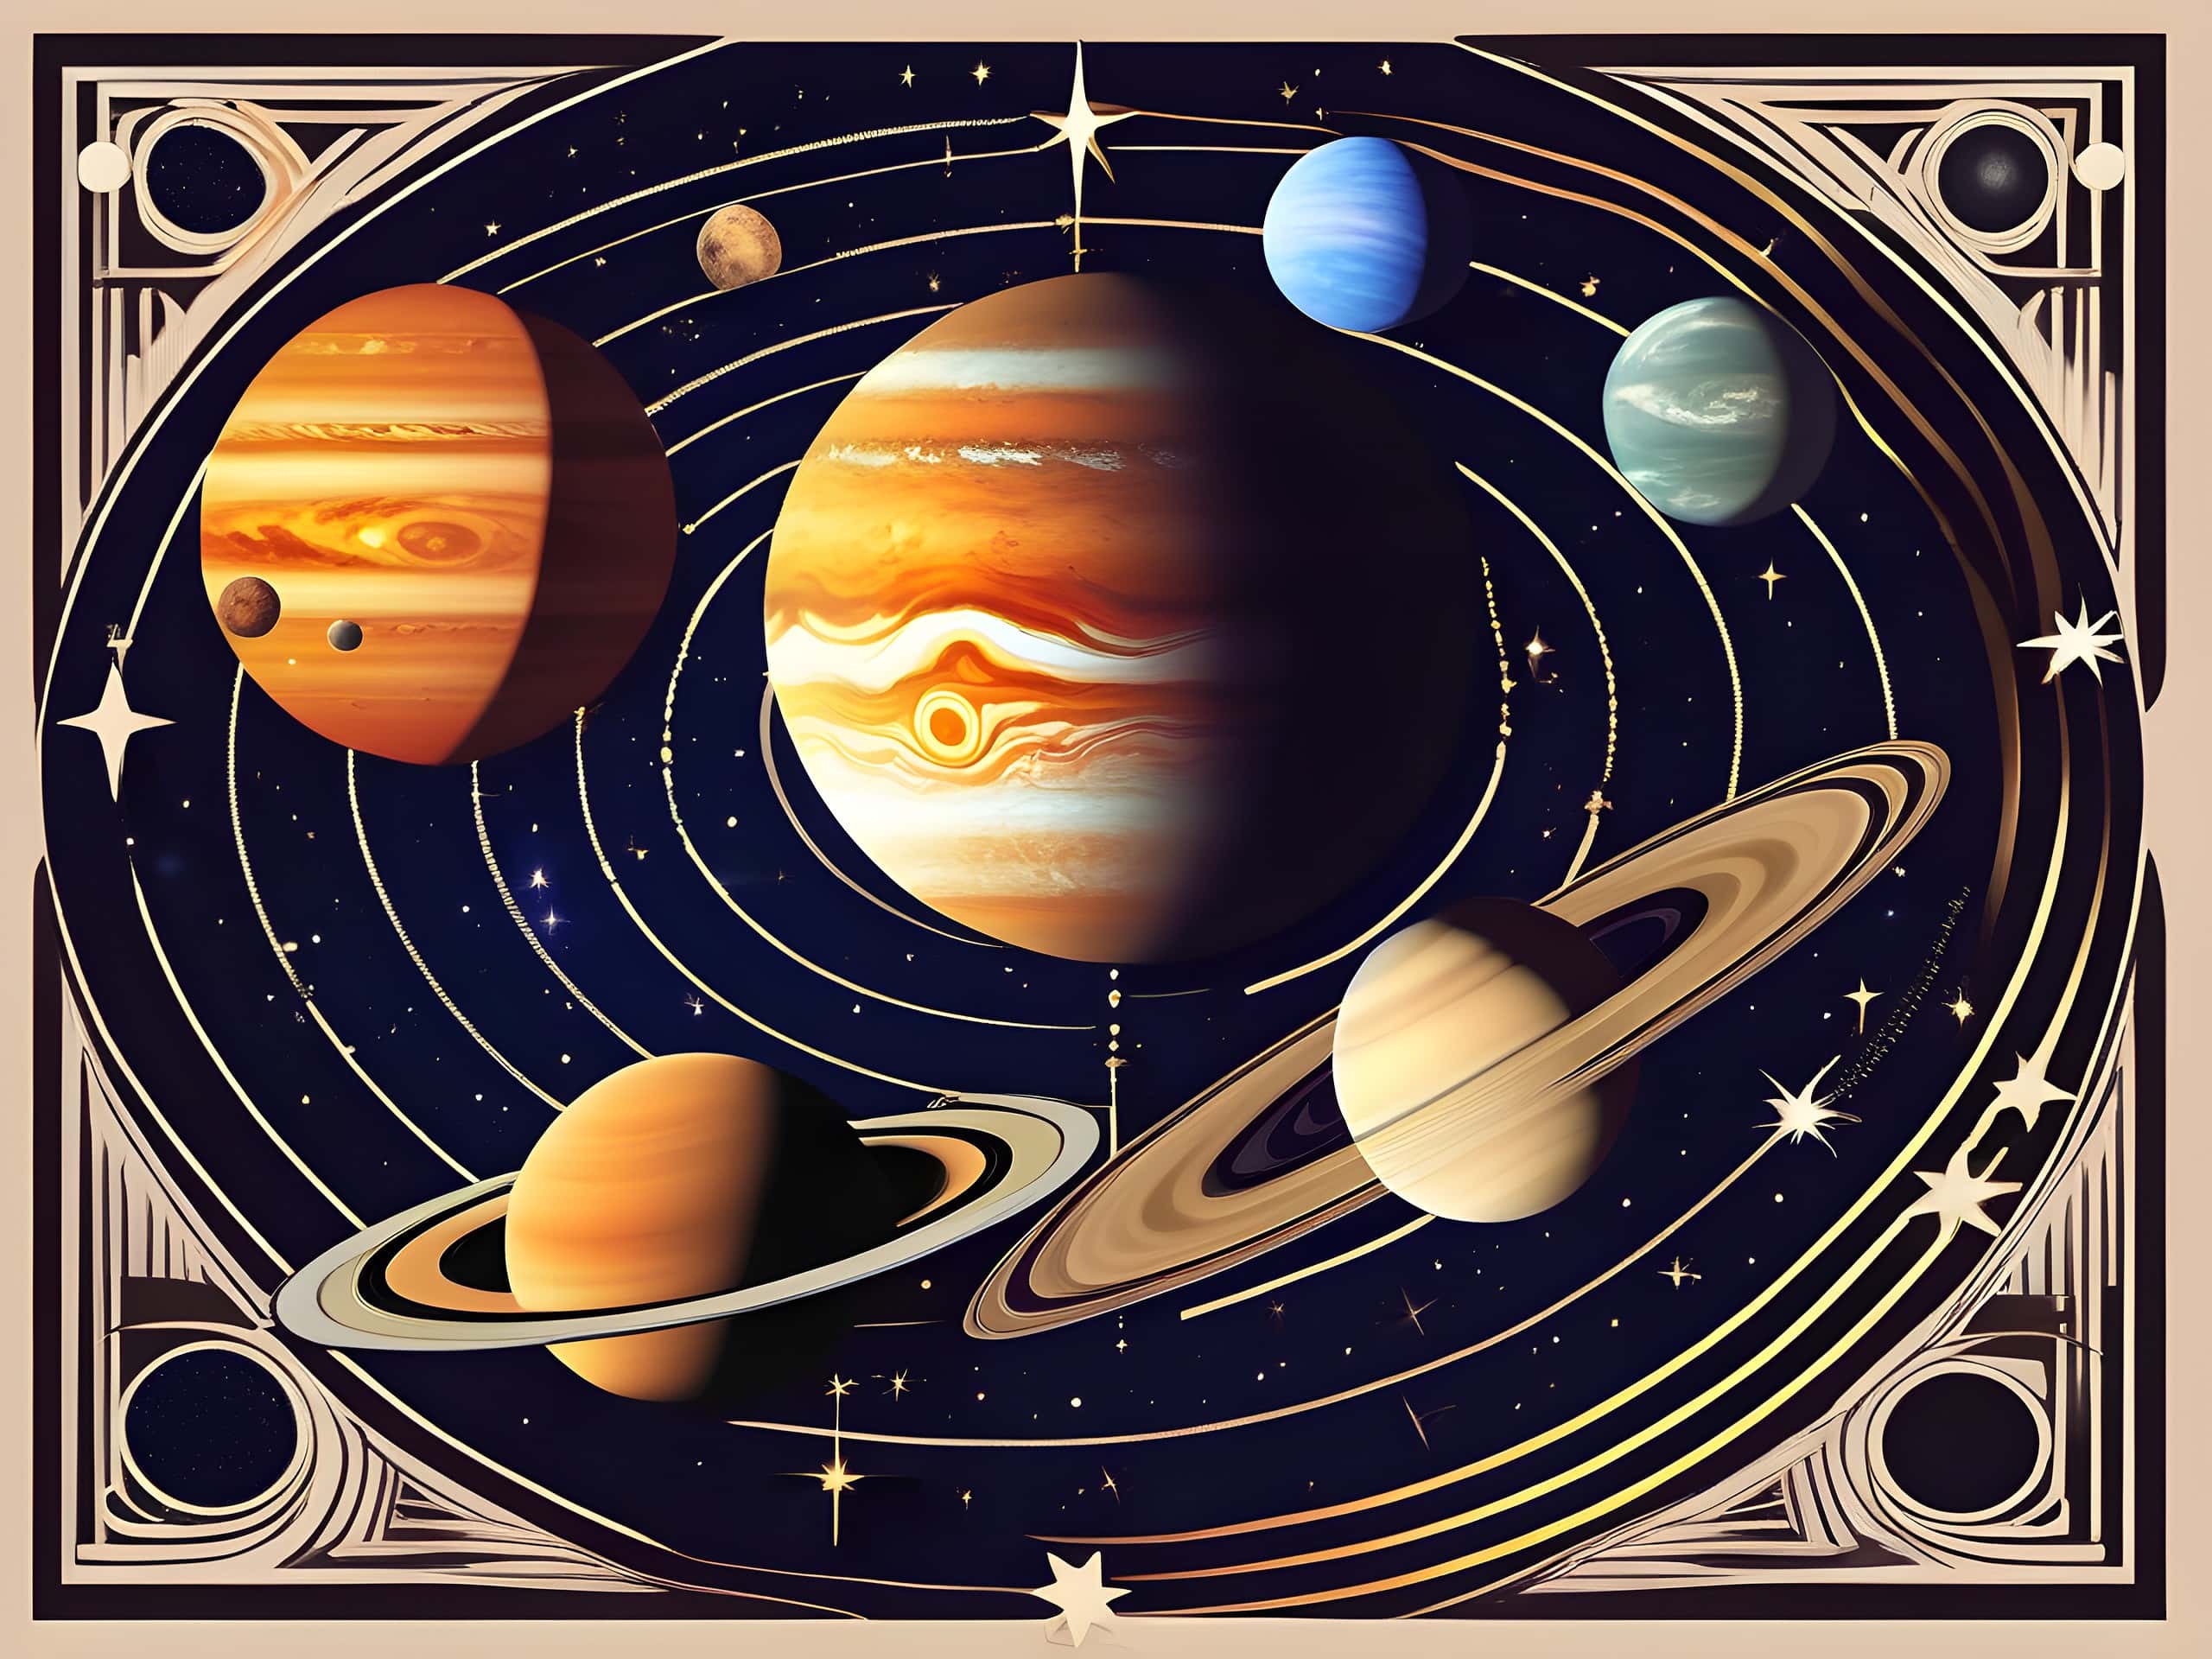 7 Planets In Retrograde There s A Reason for the Chaos MYSTICAL CI S2061295634 St50 G14.4 scaled